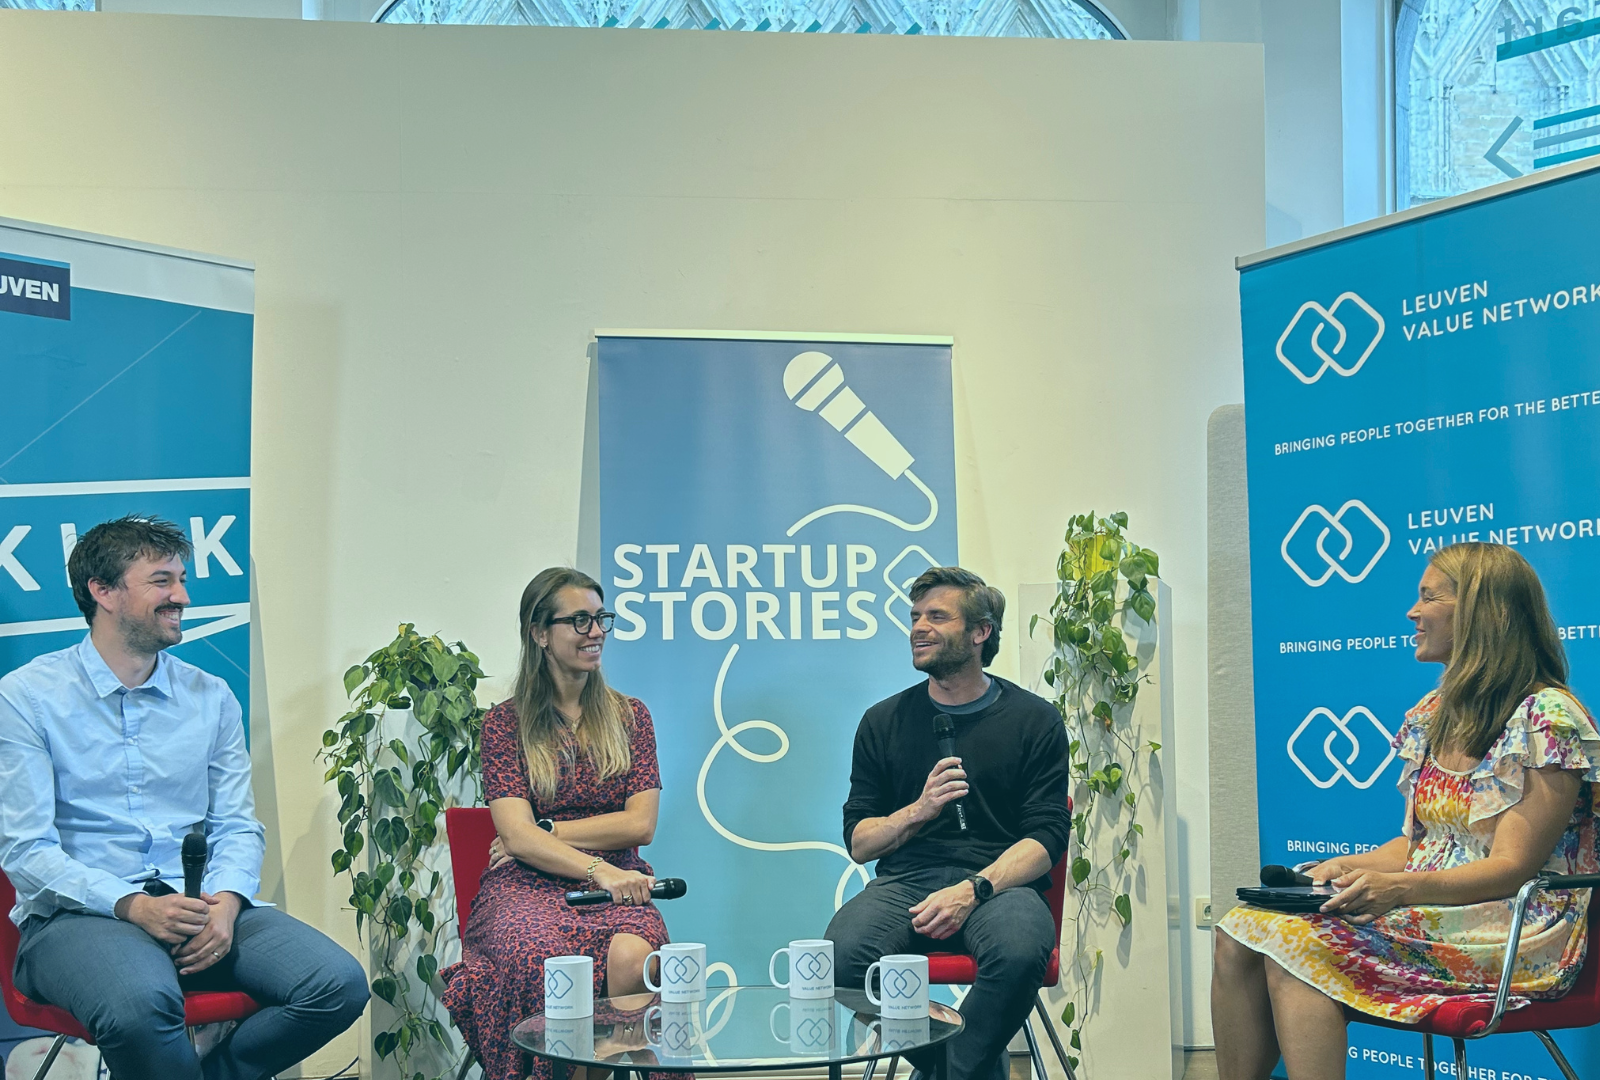 Value network startup stories event